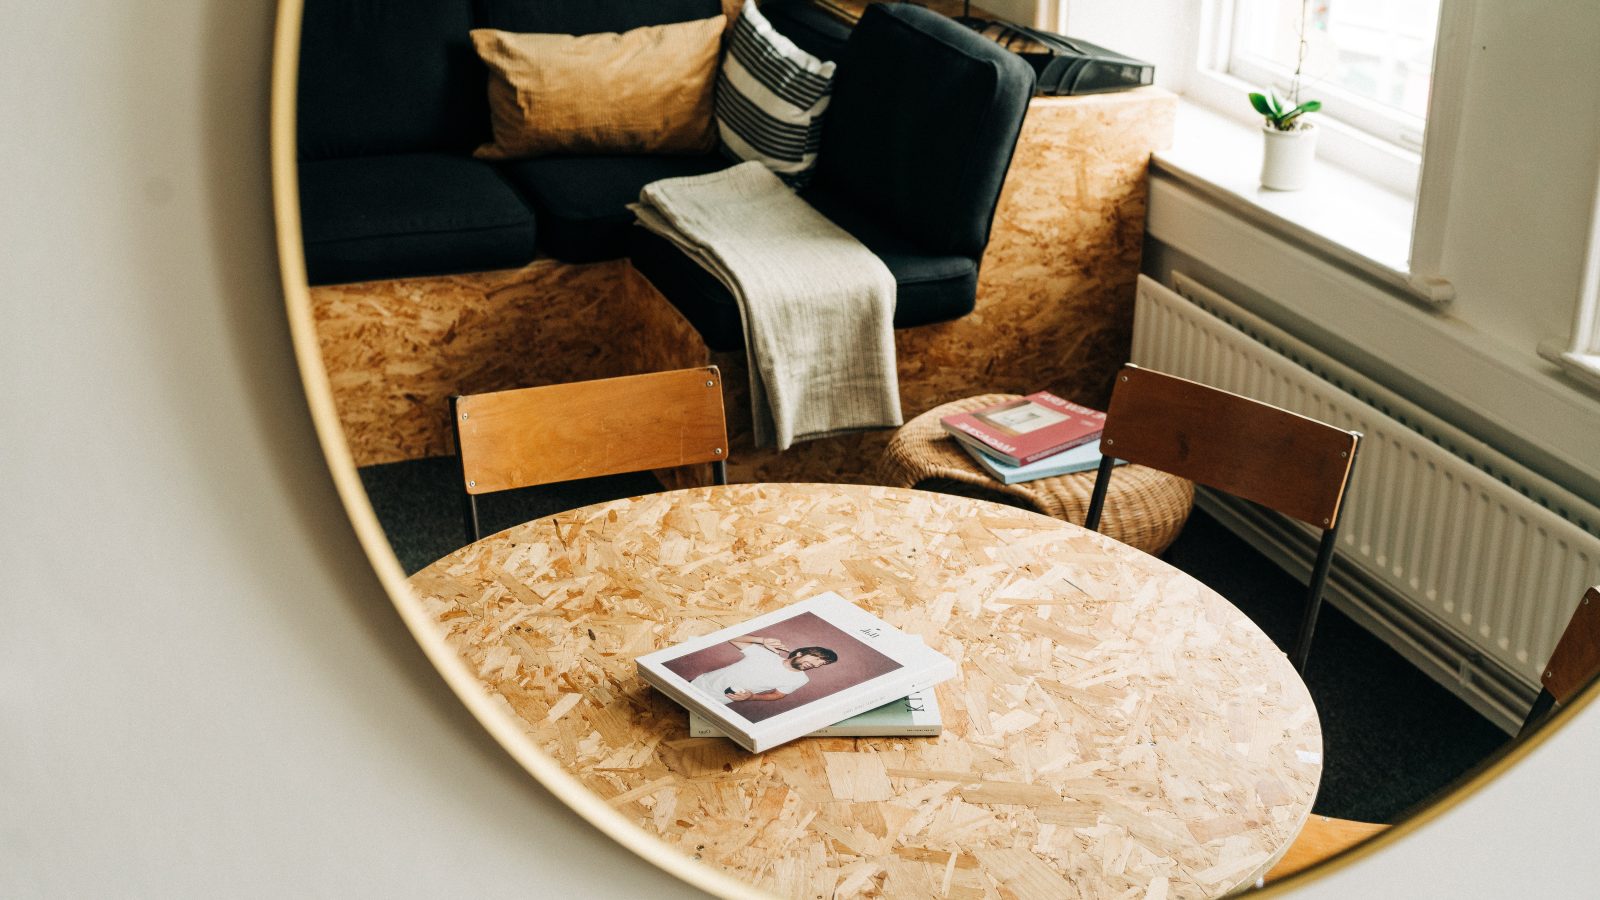 A cozy reading nook with a black sofa, wooden chairs, and a round chipboard table featuring a book on website design with a person on the cover, all reflected in a large circular mirror.